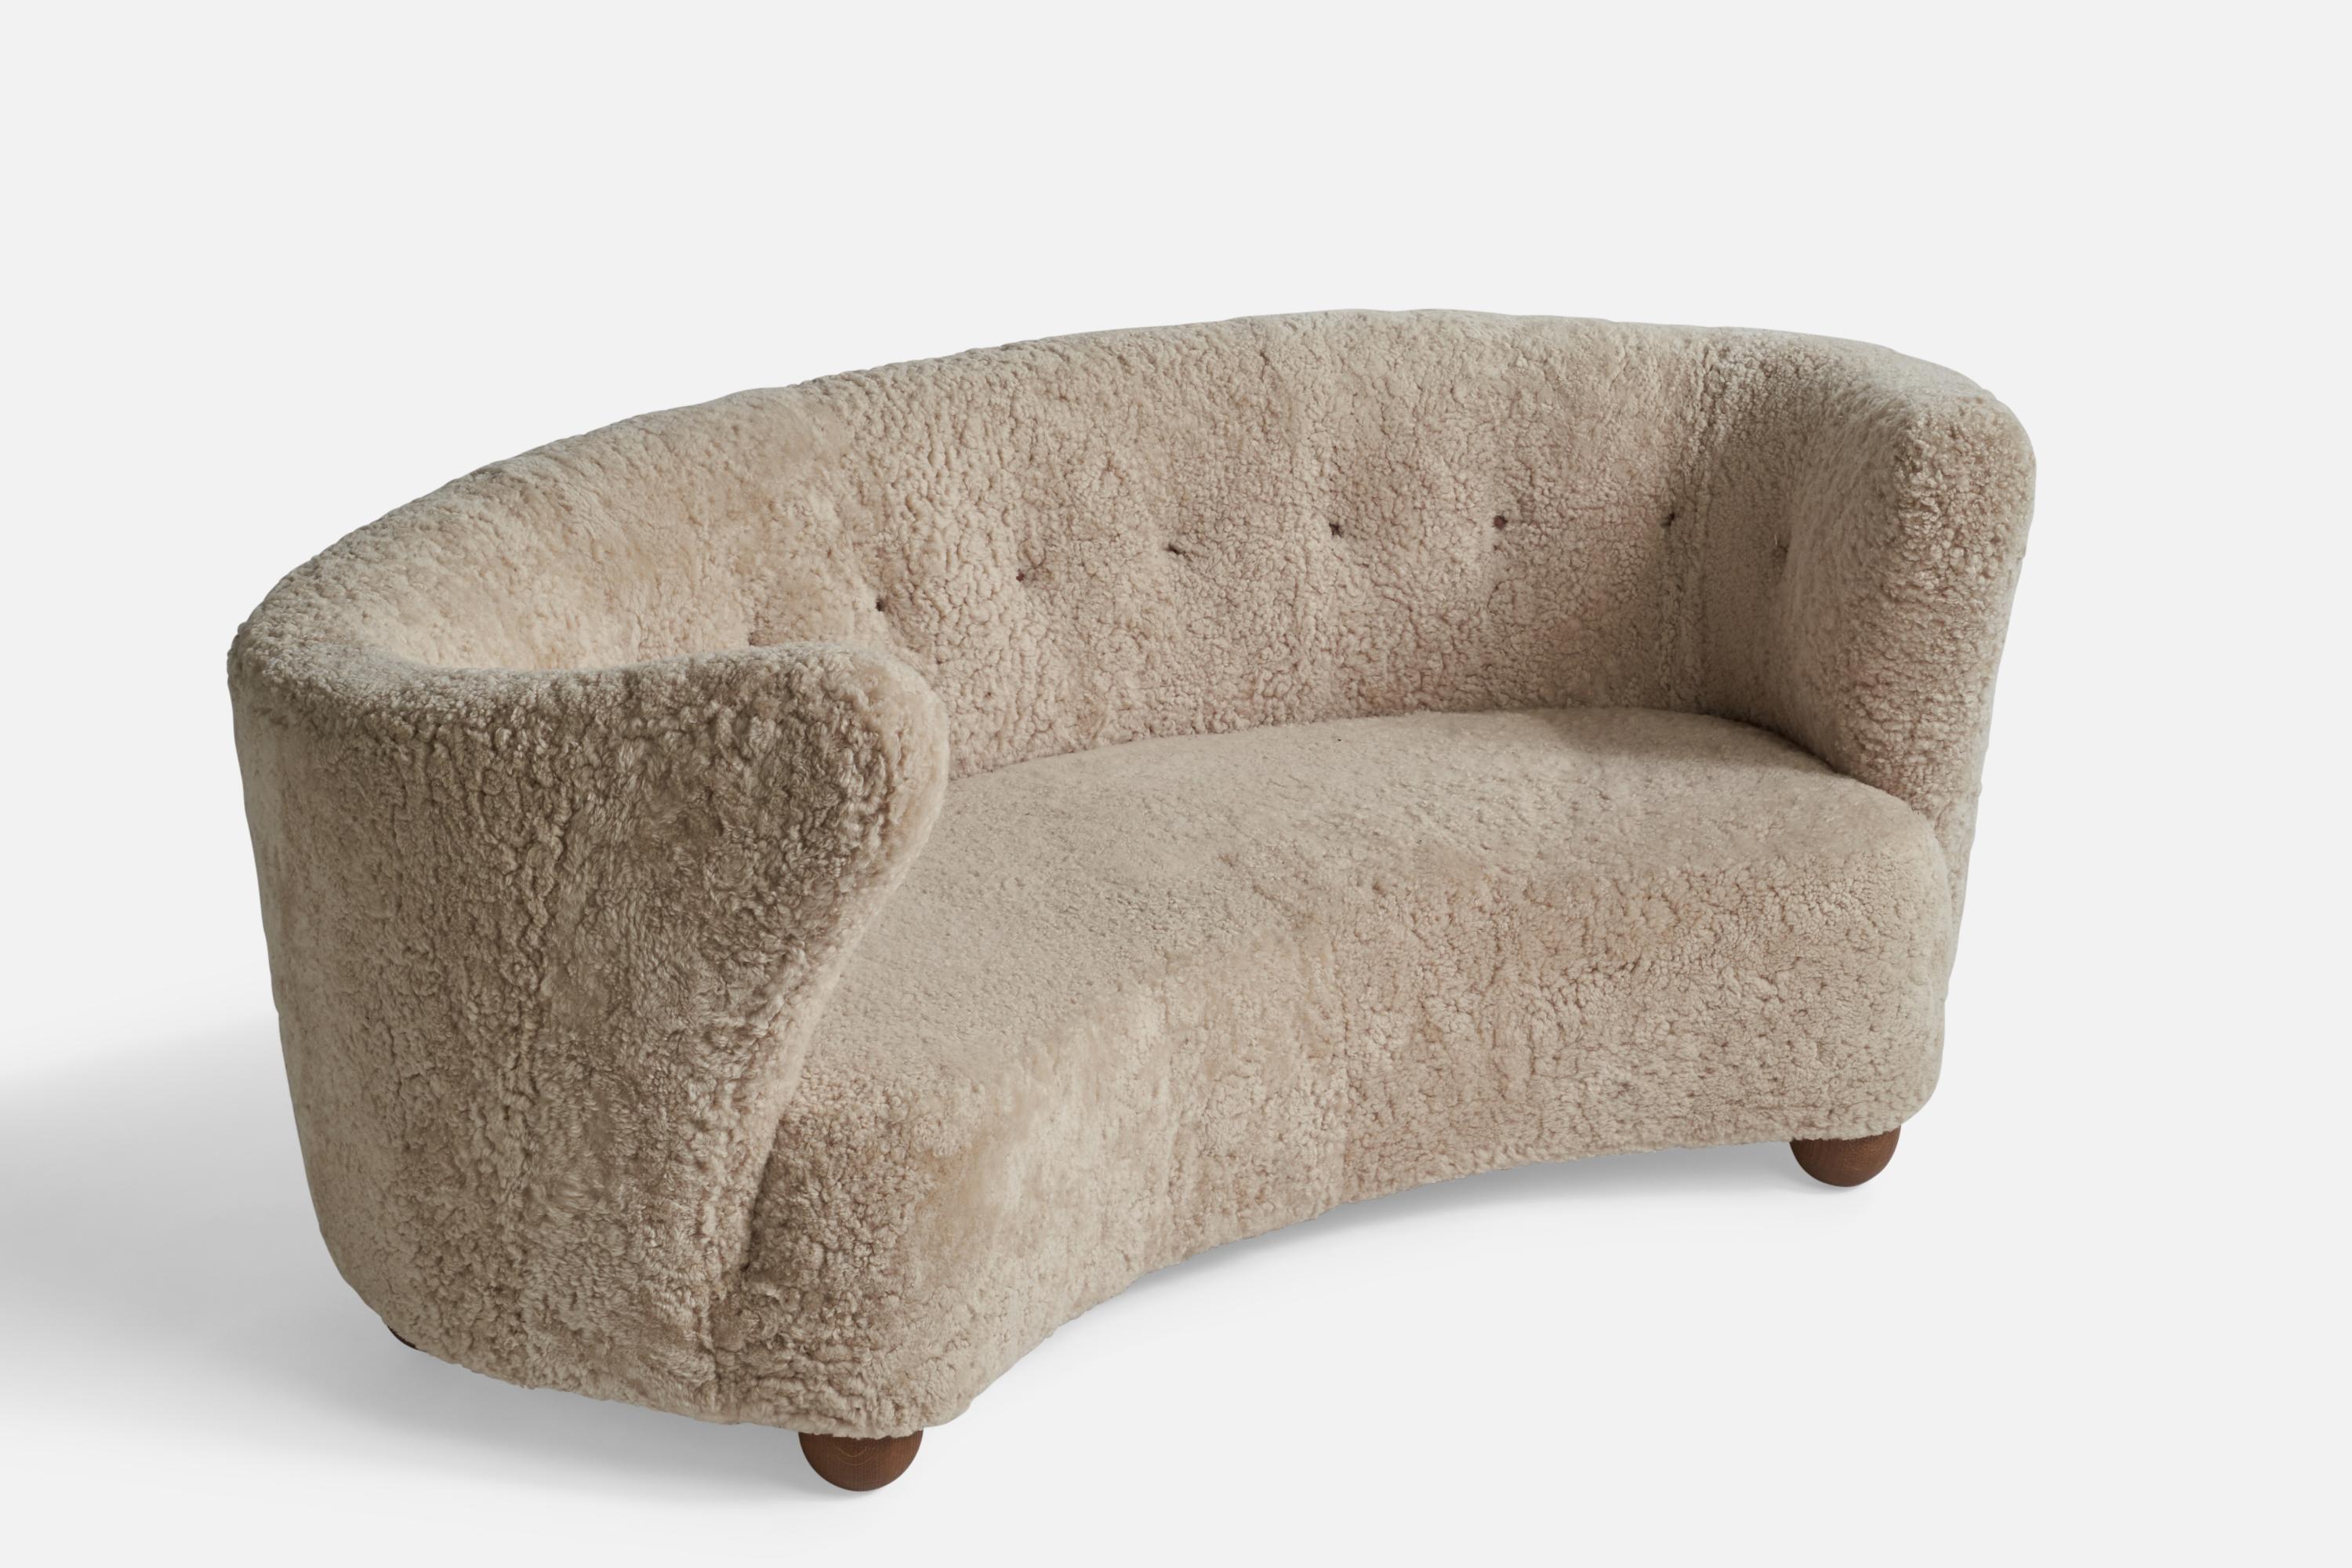 A organic curved beige shearling and wood sofa designed and produced in Denmark, 1940s.

Seat height: 15”
